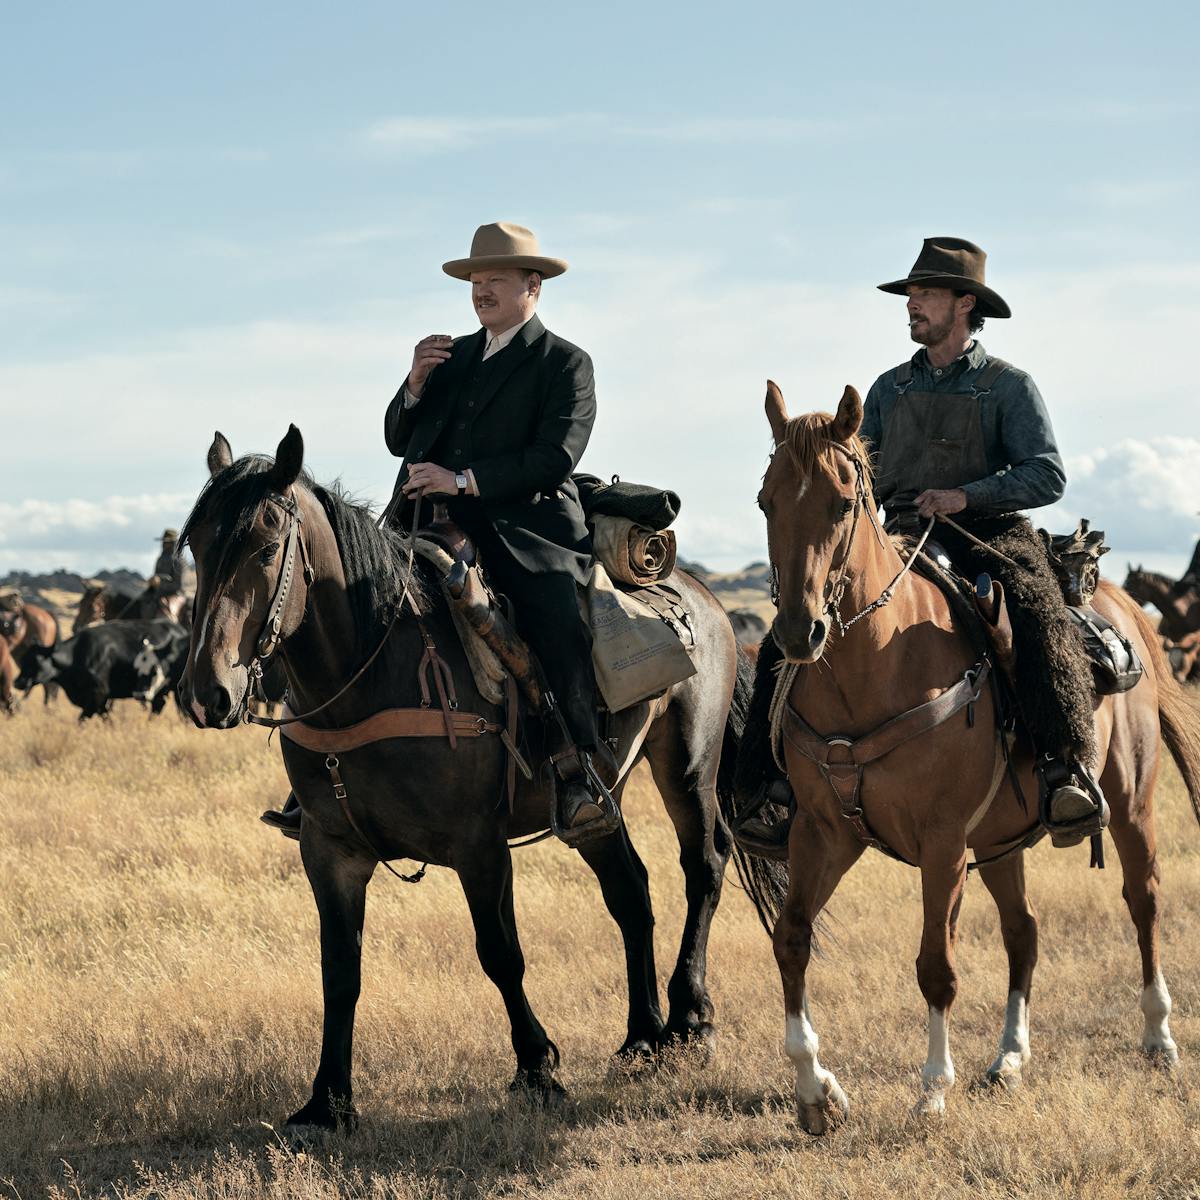 Jesse Plemons and Benedict Cumberbatch ride horses through a dry field. Behind them are tens of other horses.